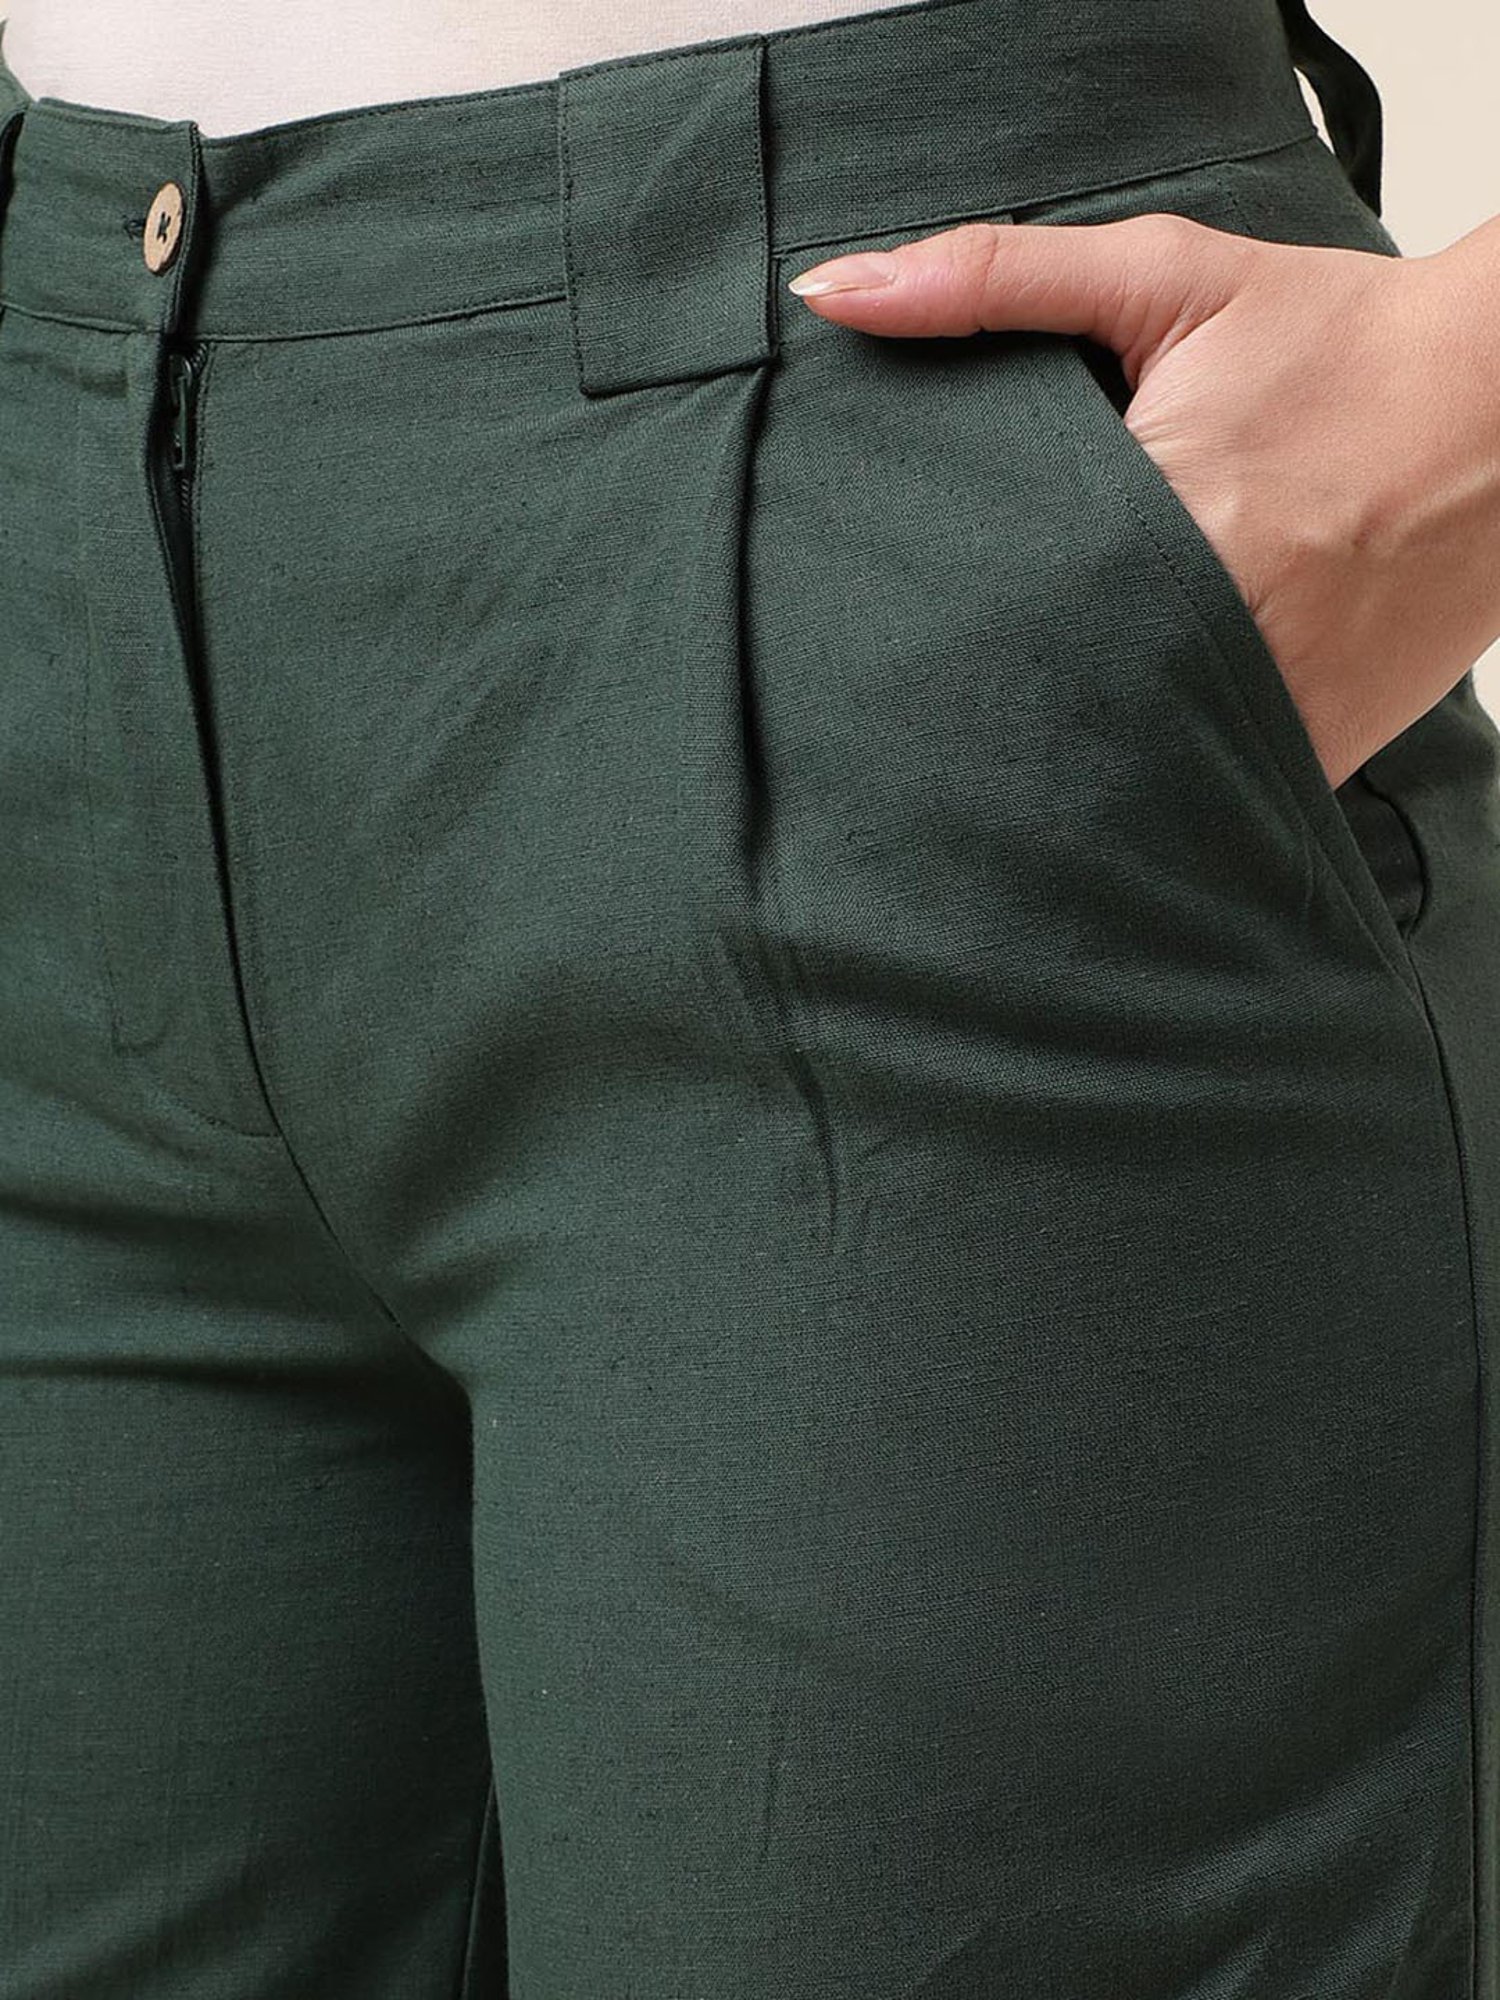 Details more than 115 dark green trousers super hot